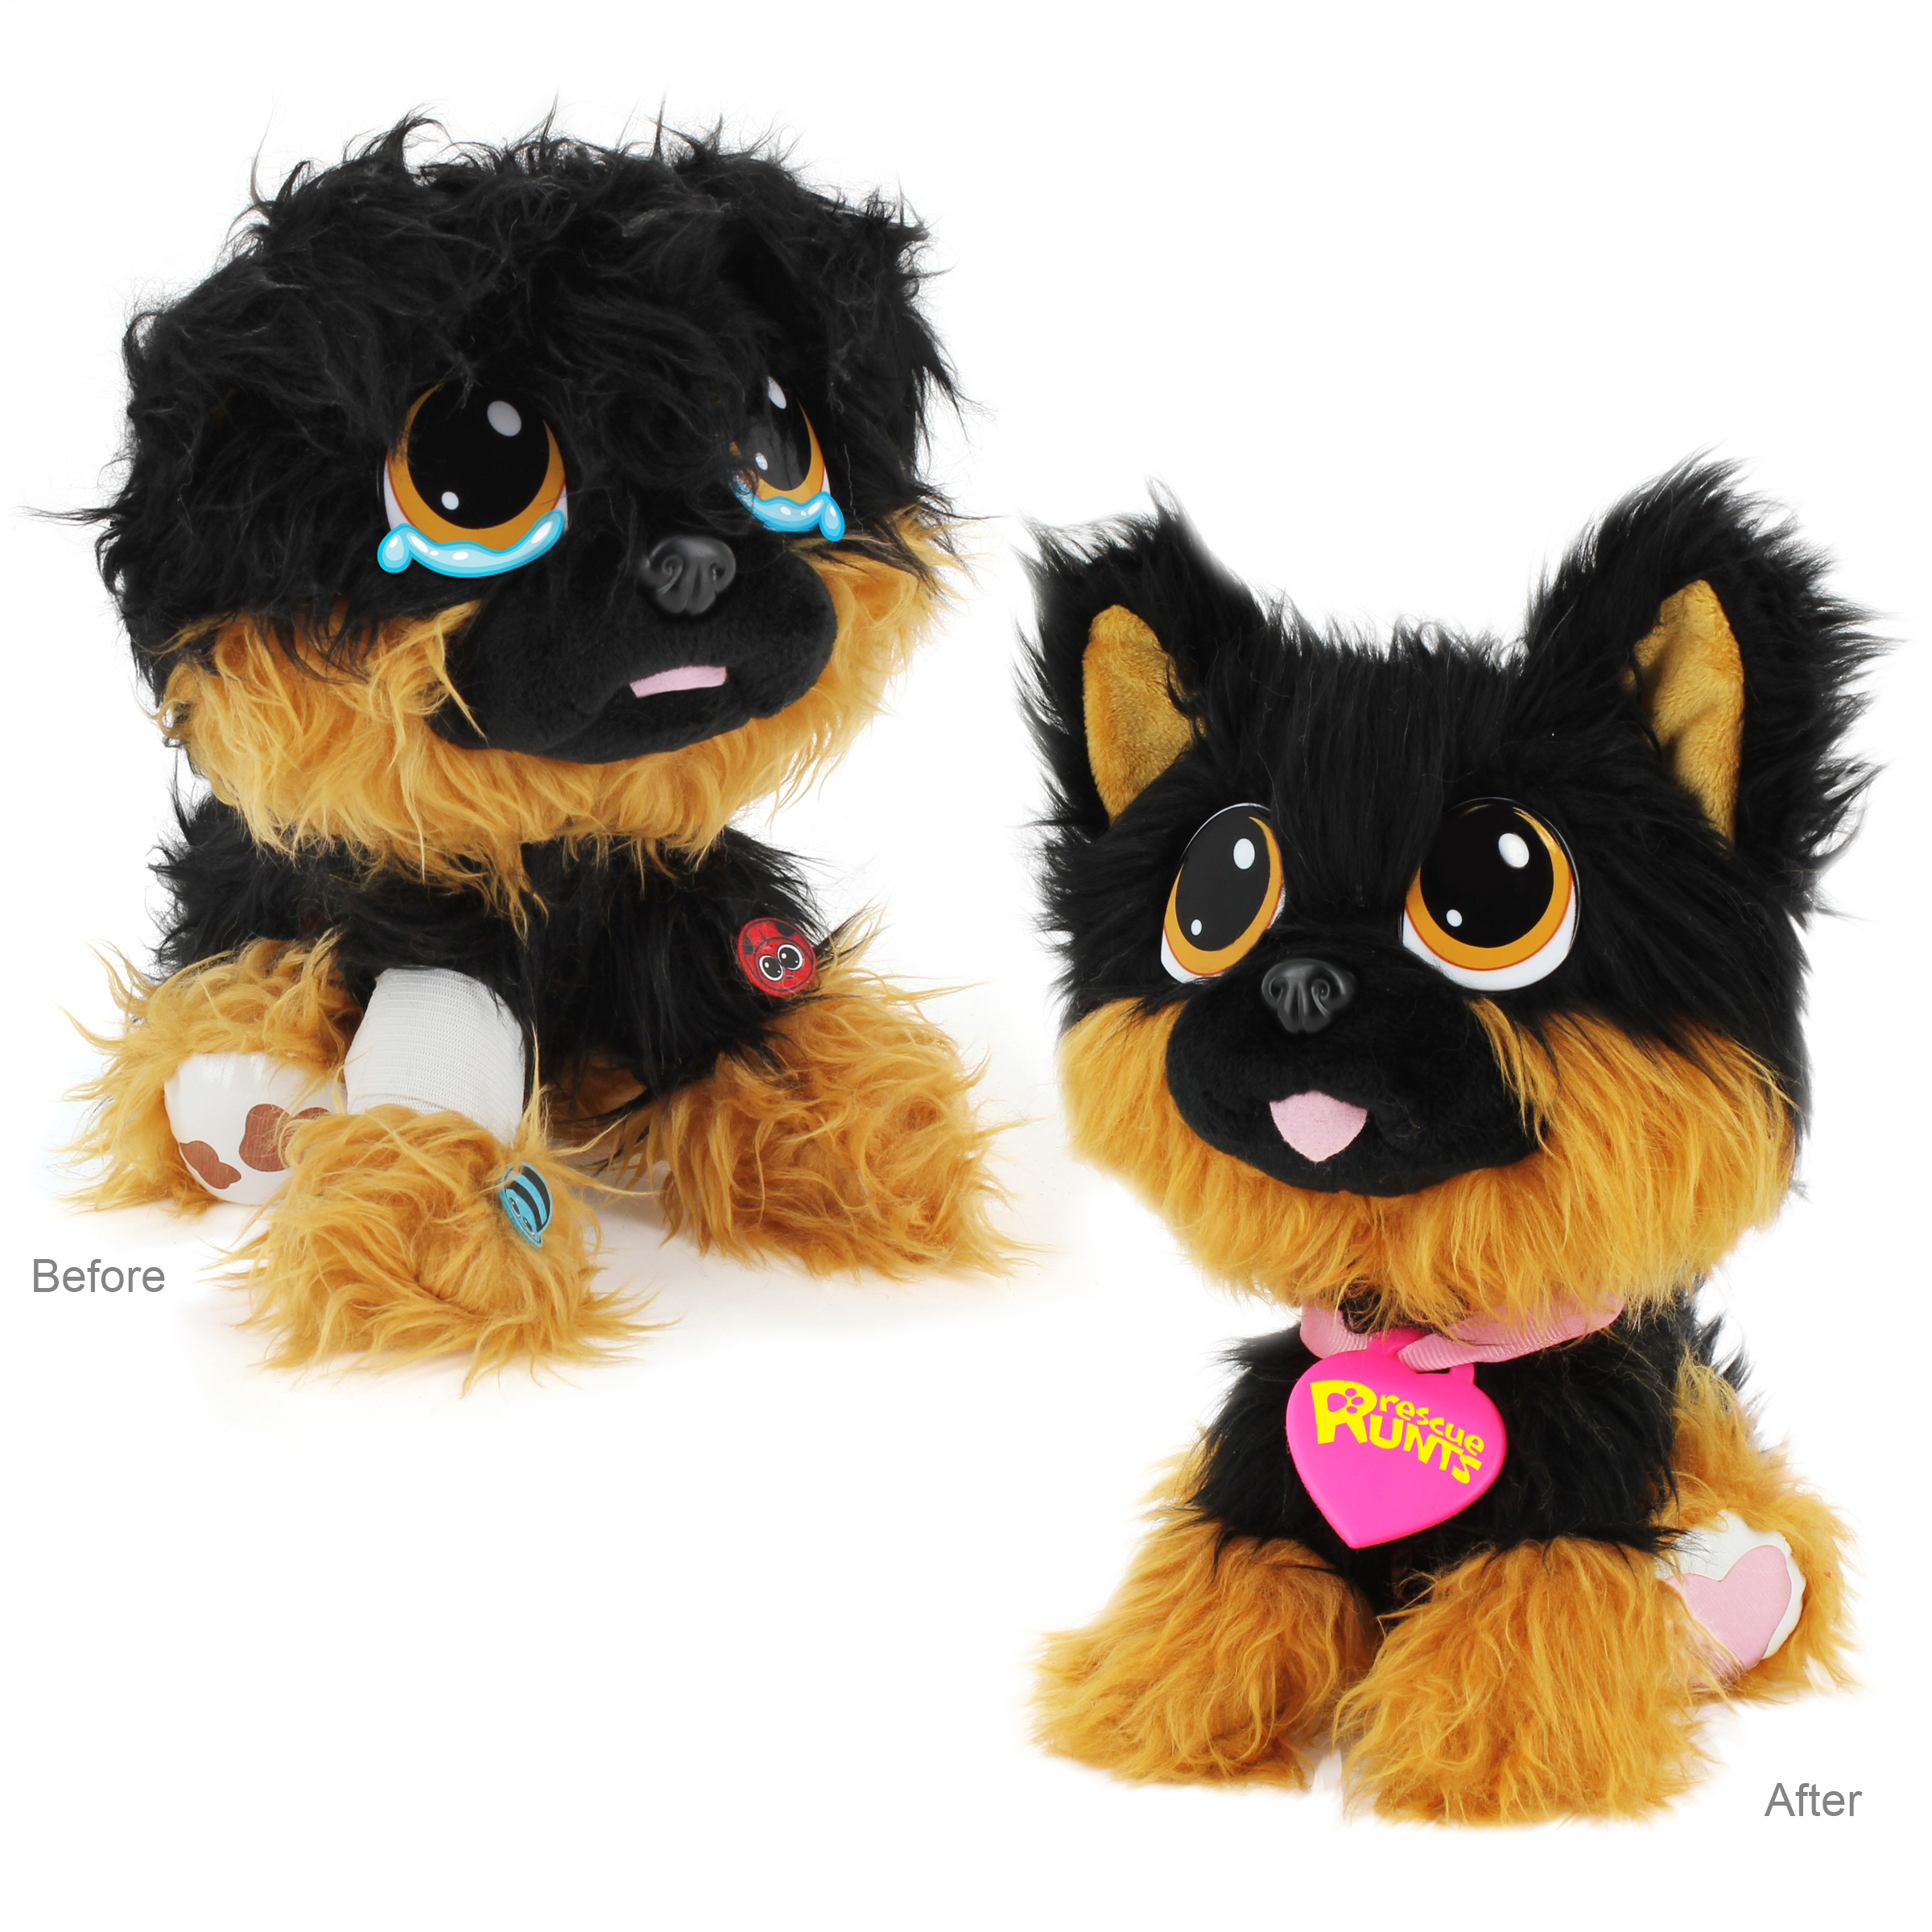 Rescue runts shepherd rescue dog plush by kd kids - image 4 of 8